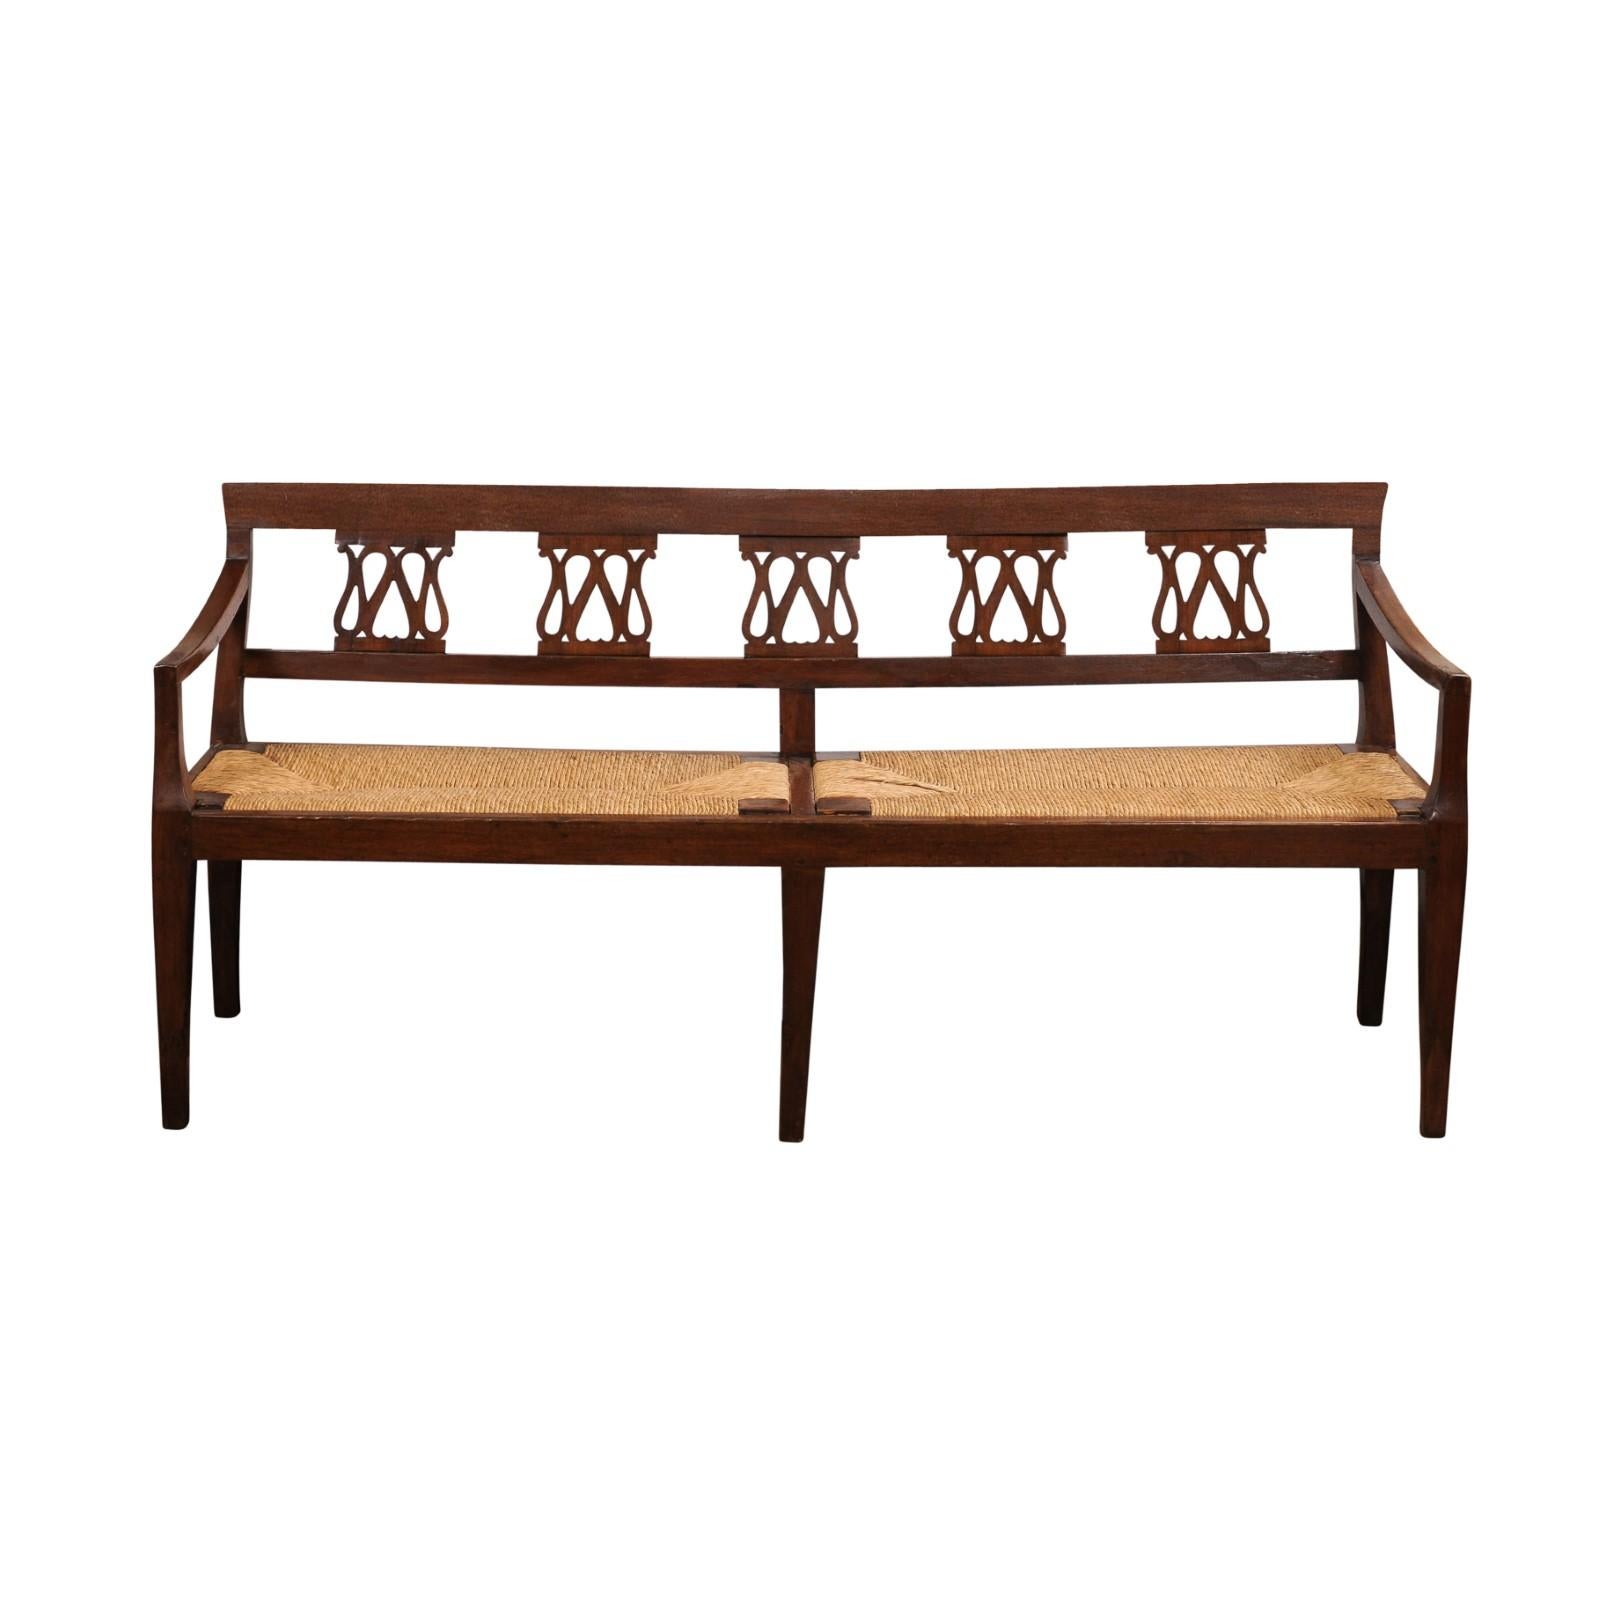 An Italian walnut bench from the 19th century with carved splats, rush seat and tapered legs. This 19th-century Italian walnut bench is a testament to classic craftsmanship and timeless style. The bench features beautifully carved splats, showcasing